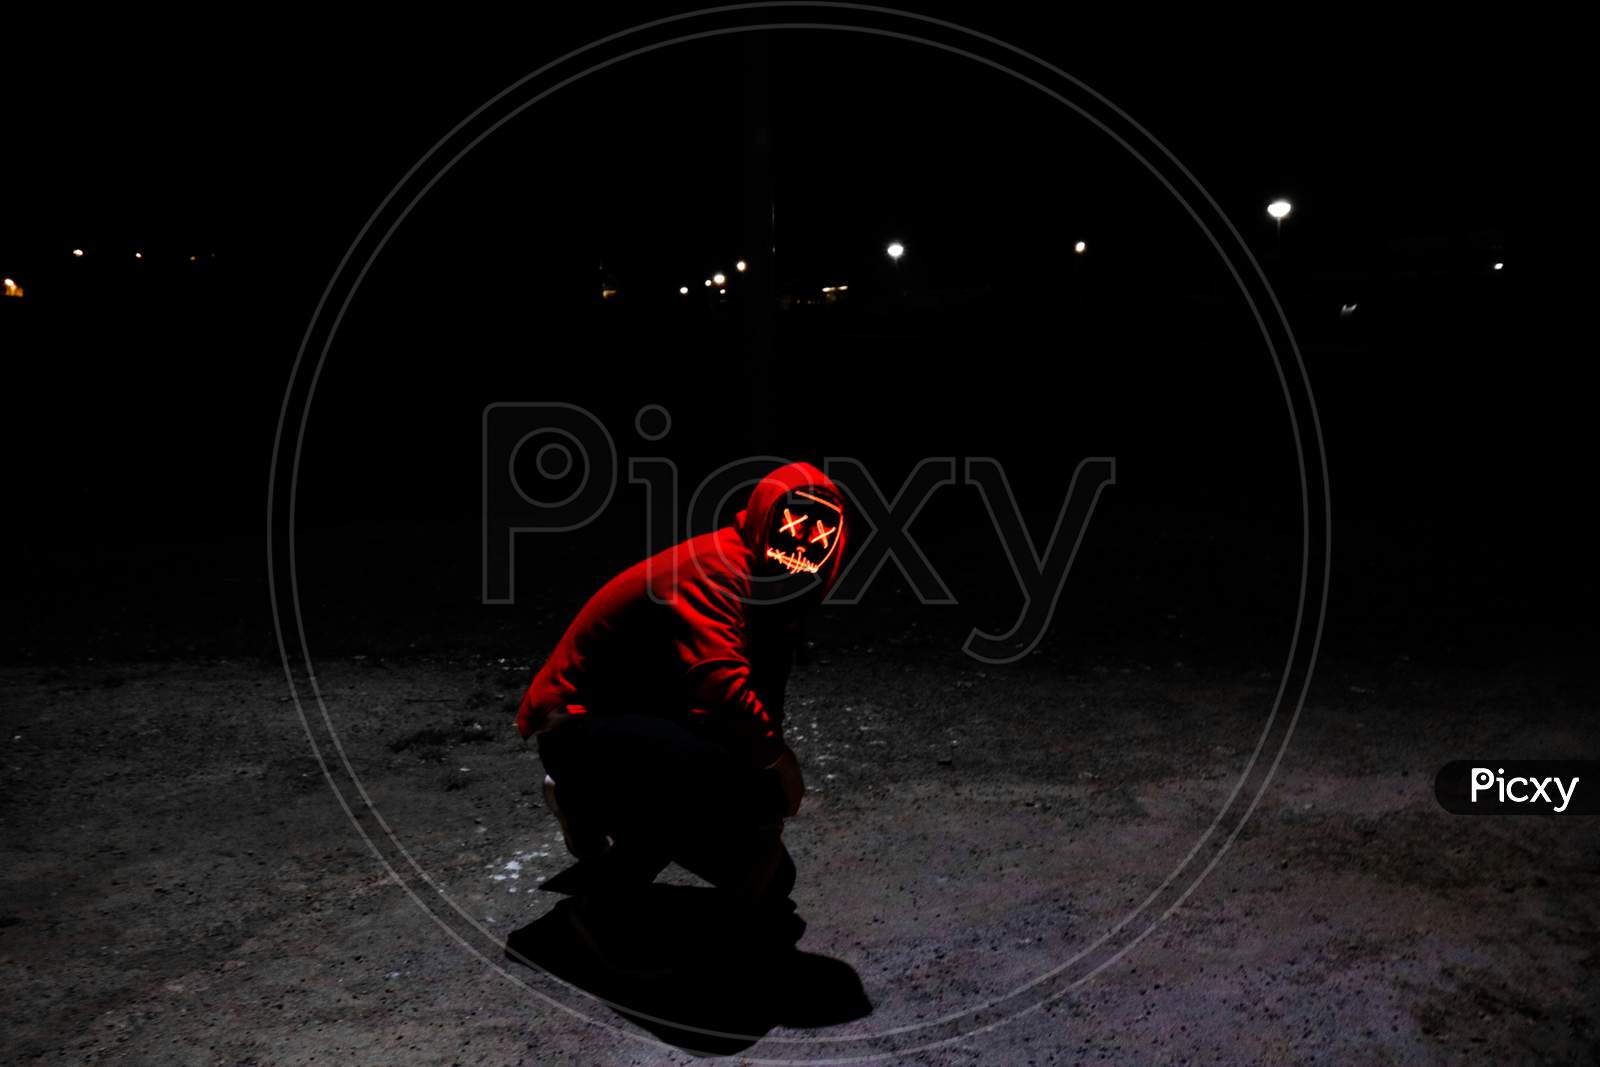 A Man Wearing A Red Hoodie With Red Glowing Mask Sitting On The Ground.